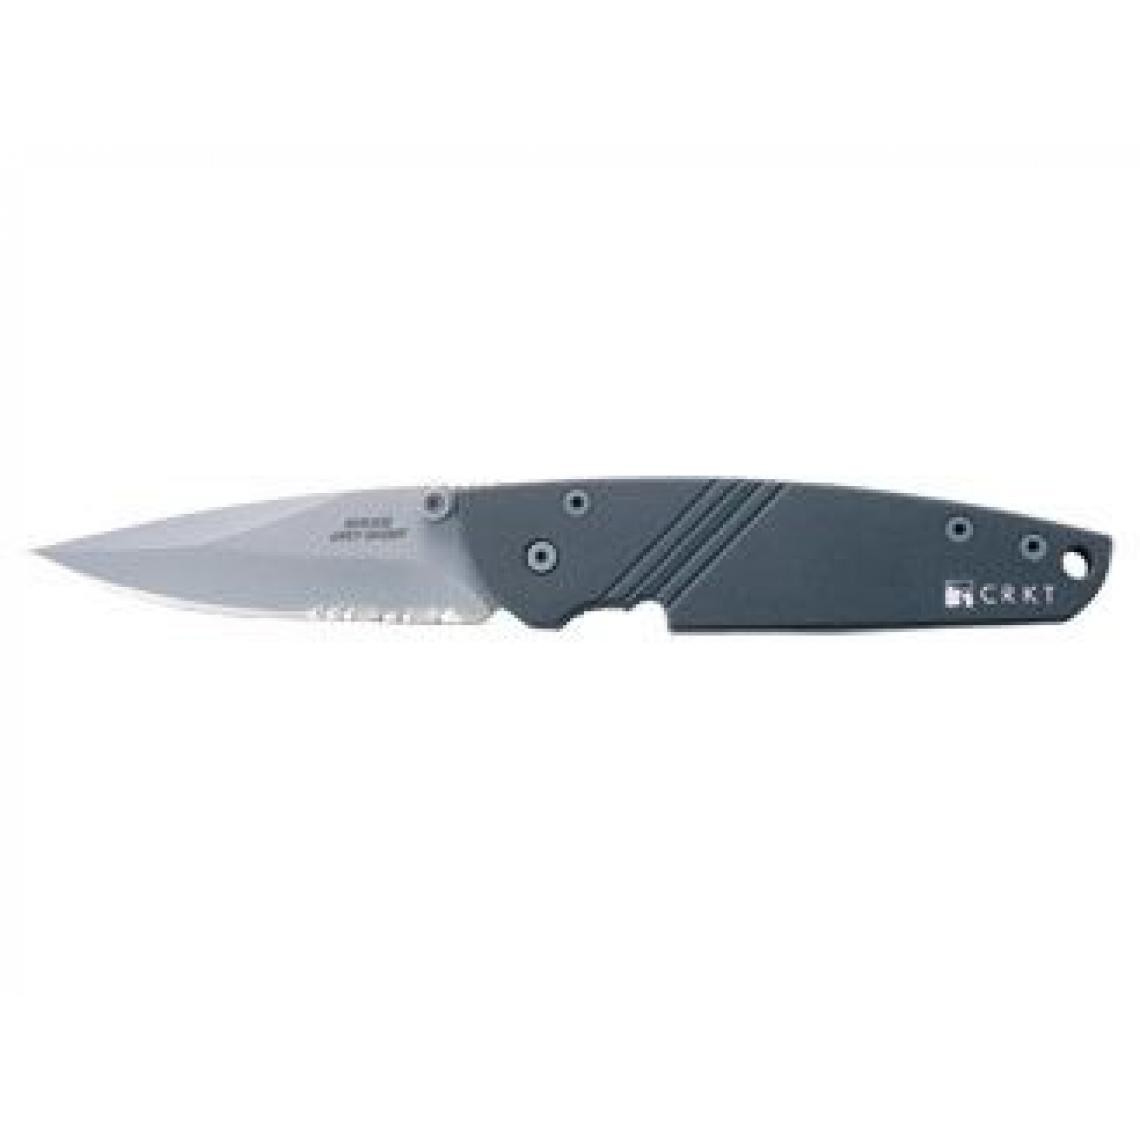 Crkt - Crkt MIRAGE GRAY GHOST 7813 COMBO - Outils de coupe